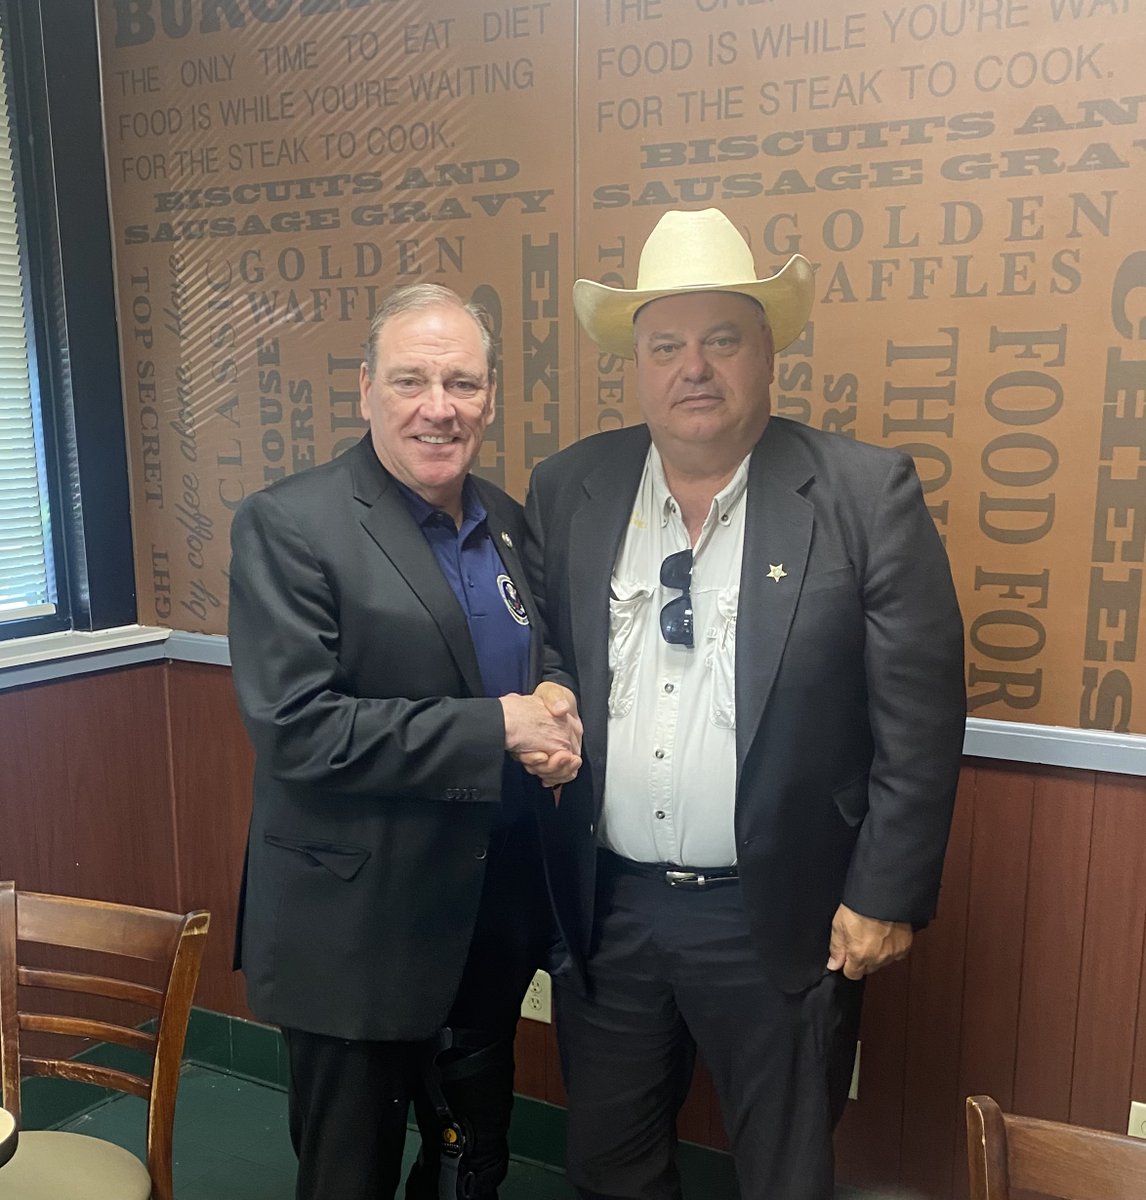 Good to see my friend Taylor County Sheriff Wayne Padgett during my swing through the district! Whether it's debris removal after Idalia or working to keep drugs off the streets, Sheriff Padgett & his office have been great partners. Taylor County is lucky to have them! #FL02